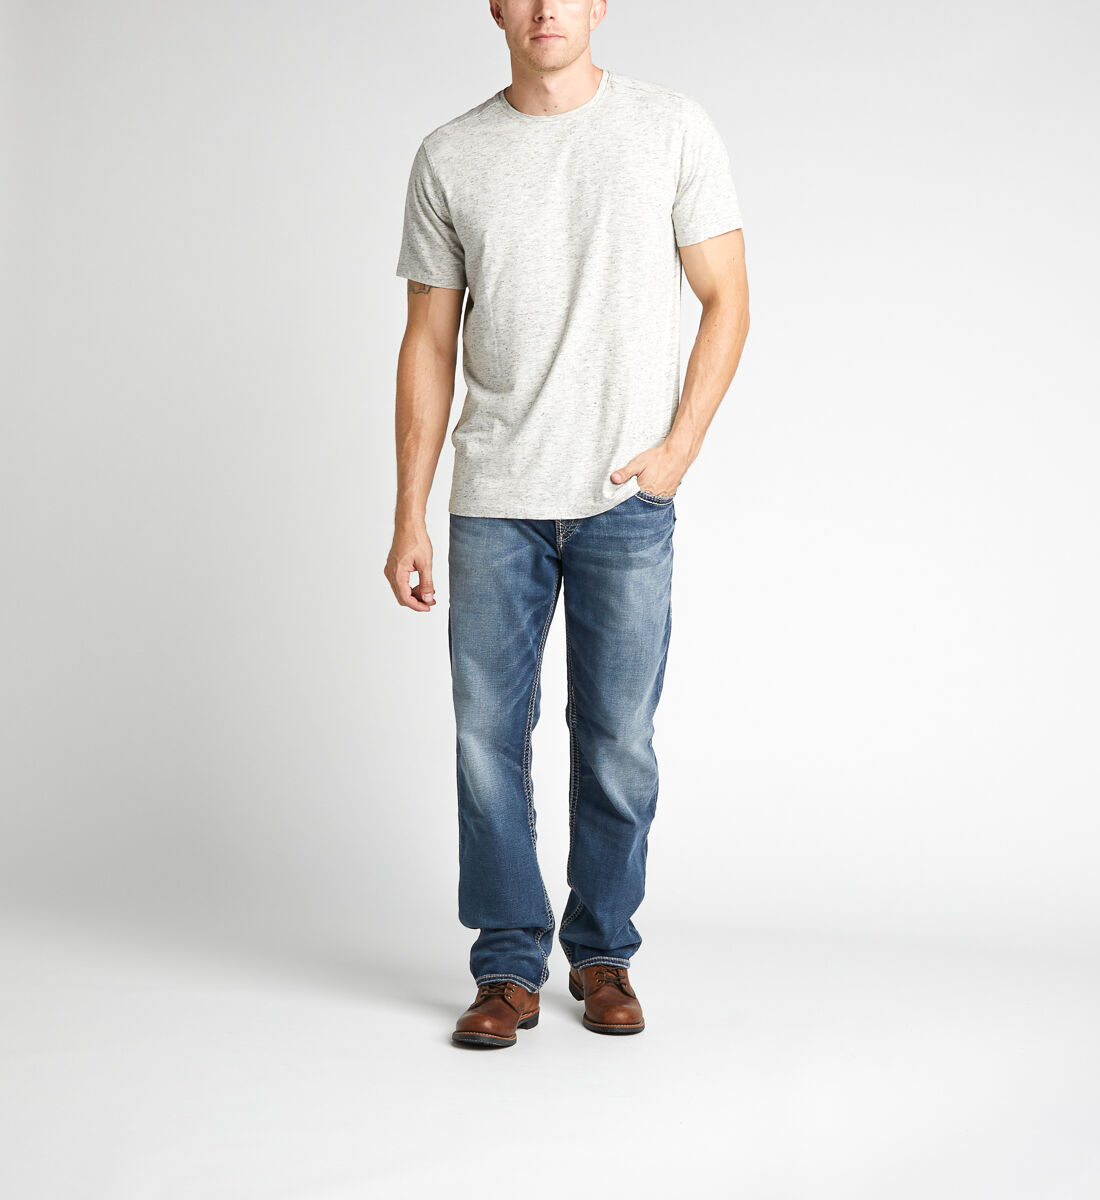 mens big and tall blue jeans